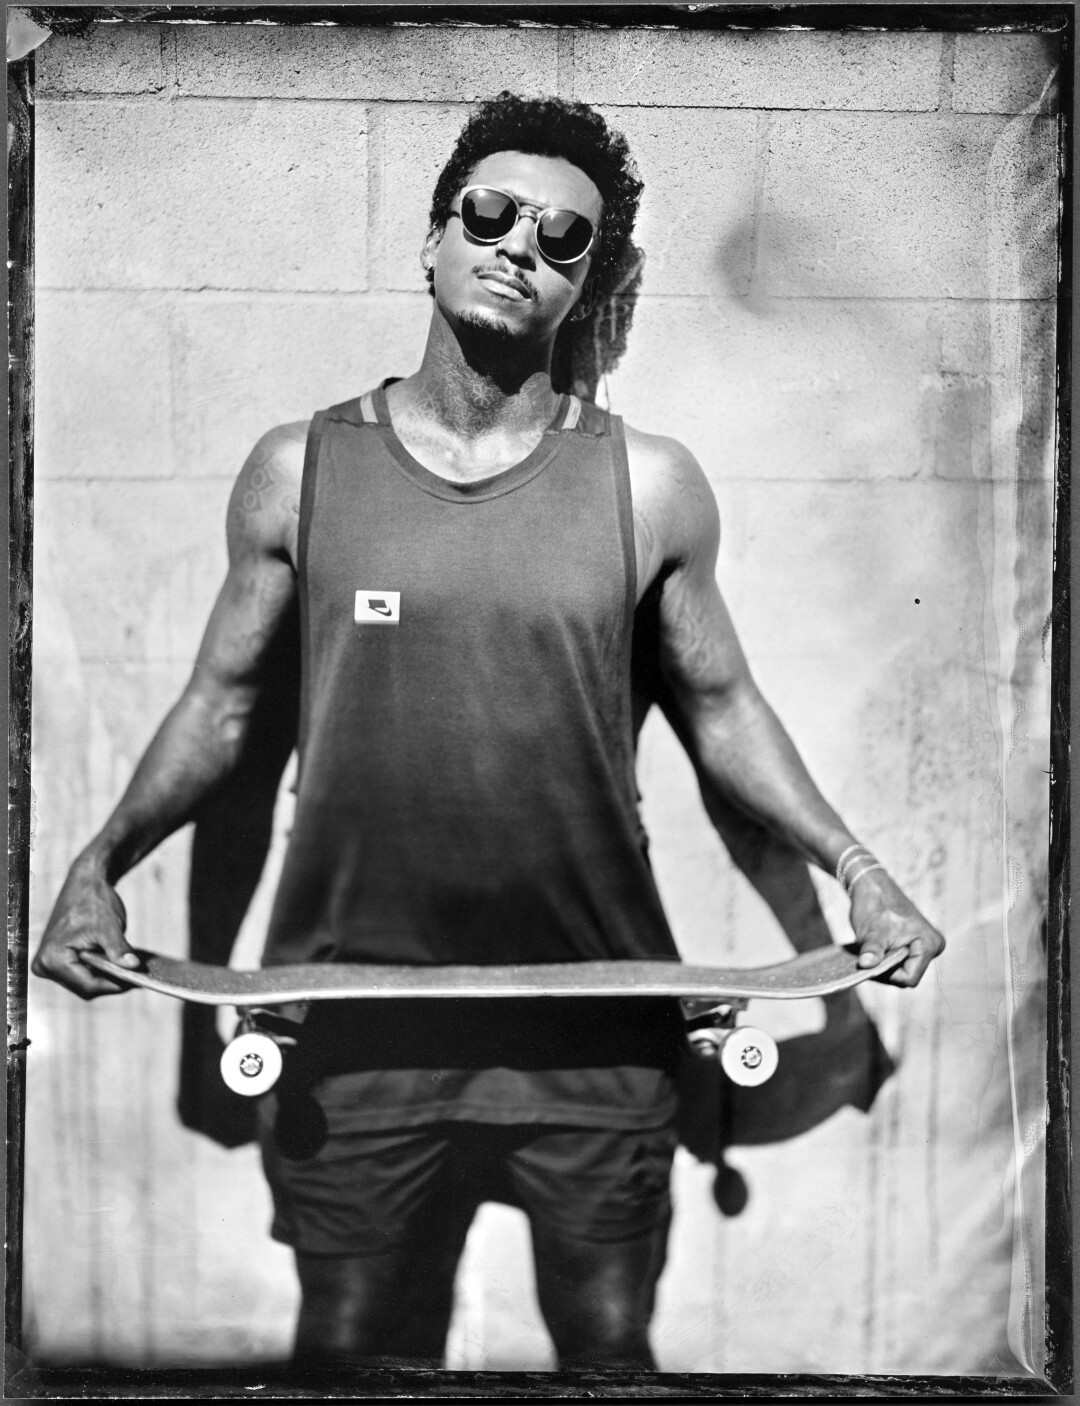 May 4: A man holds a skateboard in a black and white photo